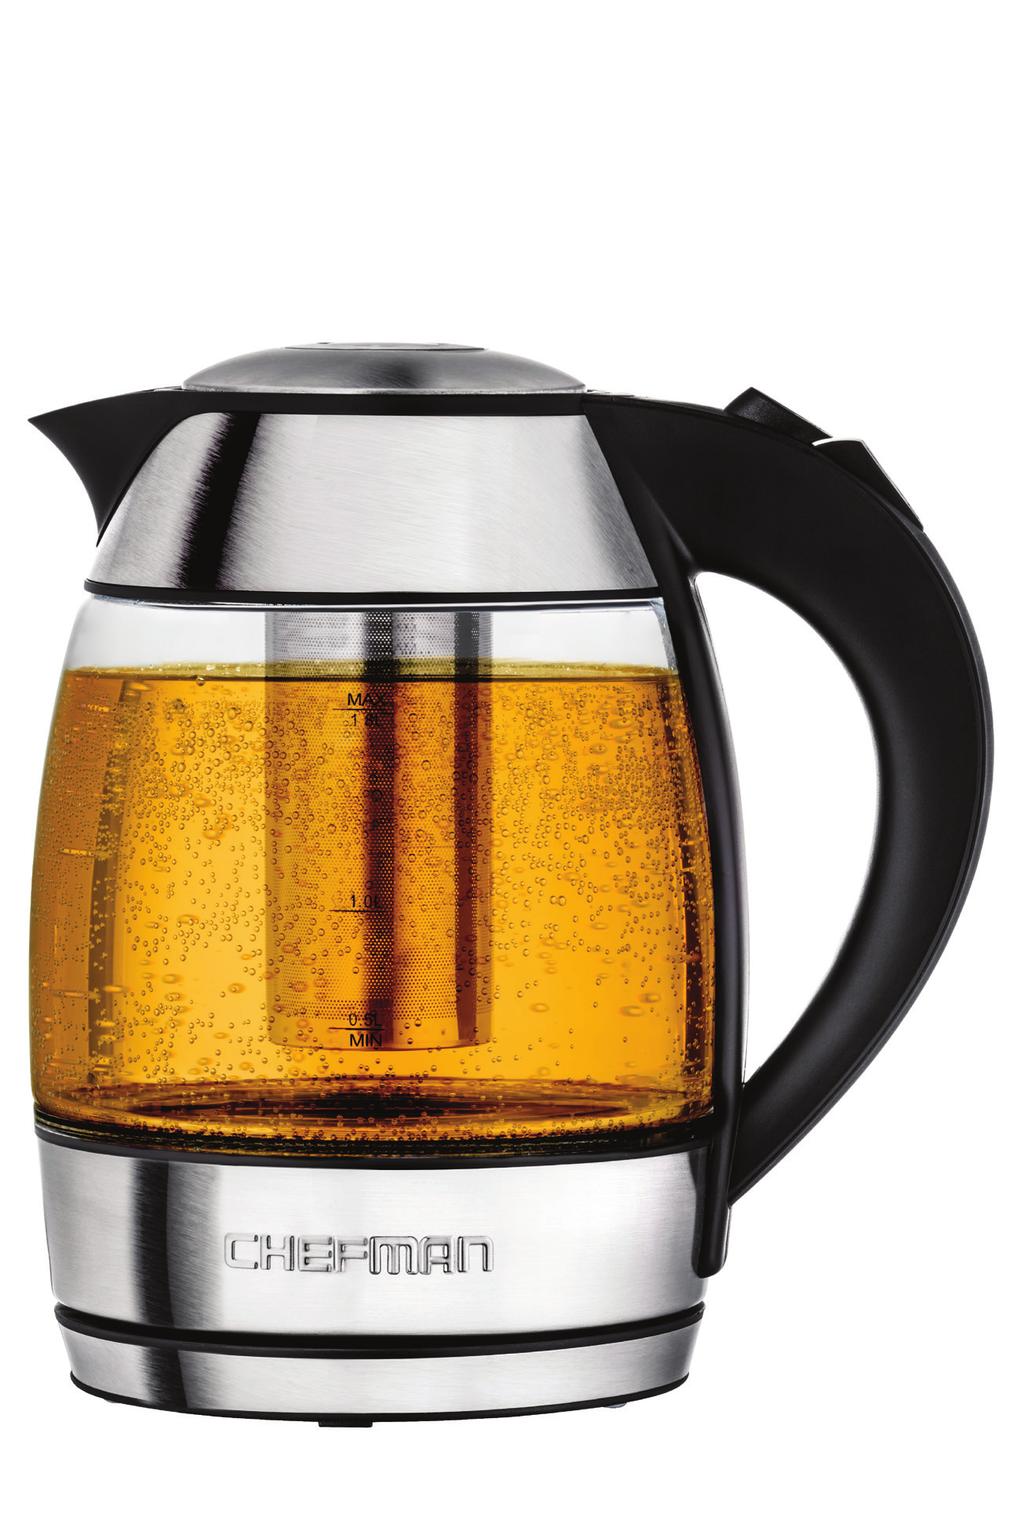 CORDLESS GLASS ELECTRIC KETTLE WITH BONUS TEA INFUSER USER GUIDE Now that you have purchased a Chefman product you can rest assured in the knowledge that as well as your 1-year parts and labor